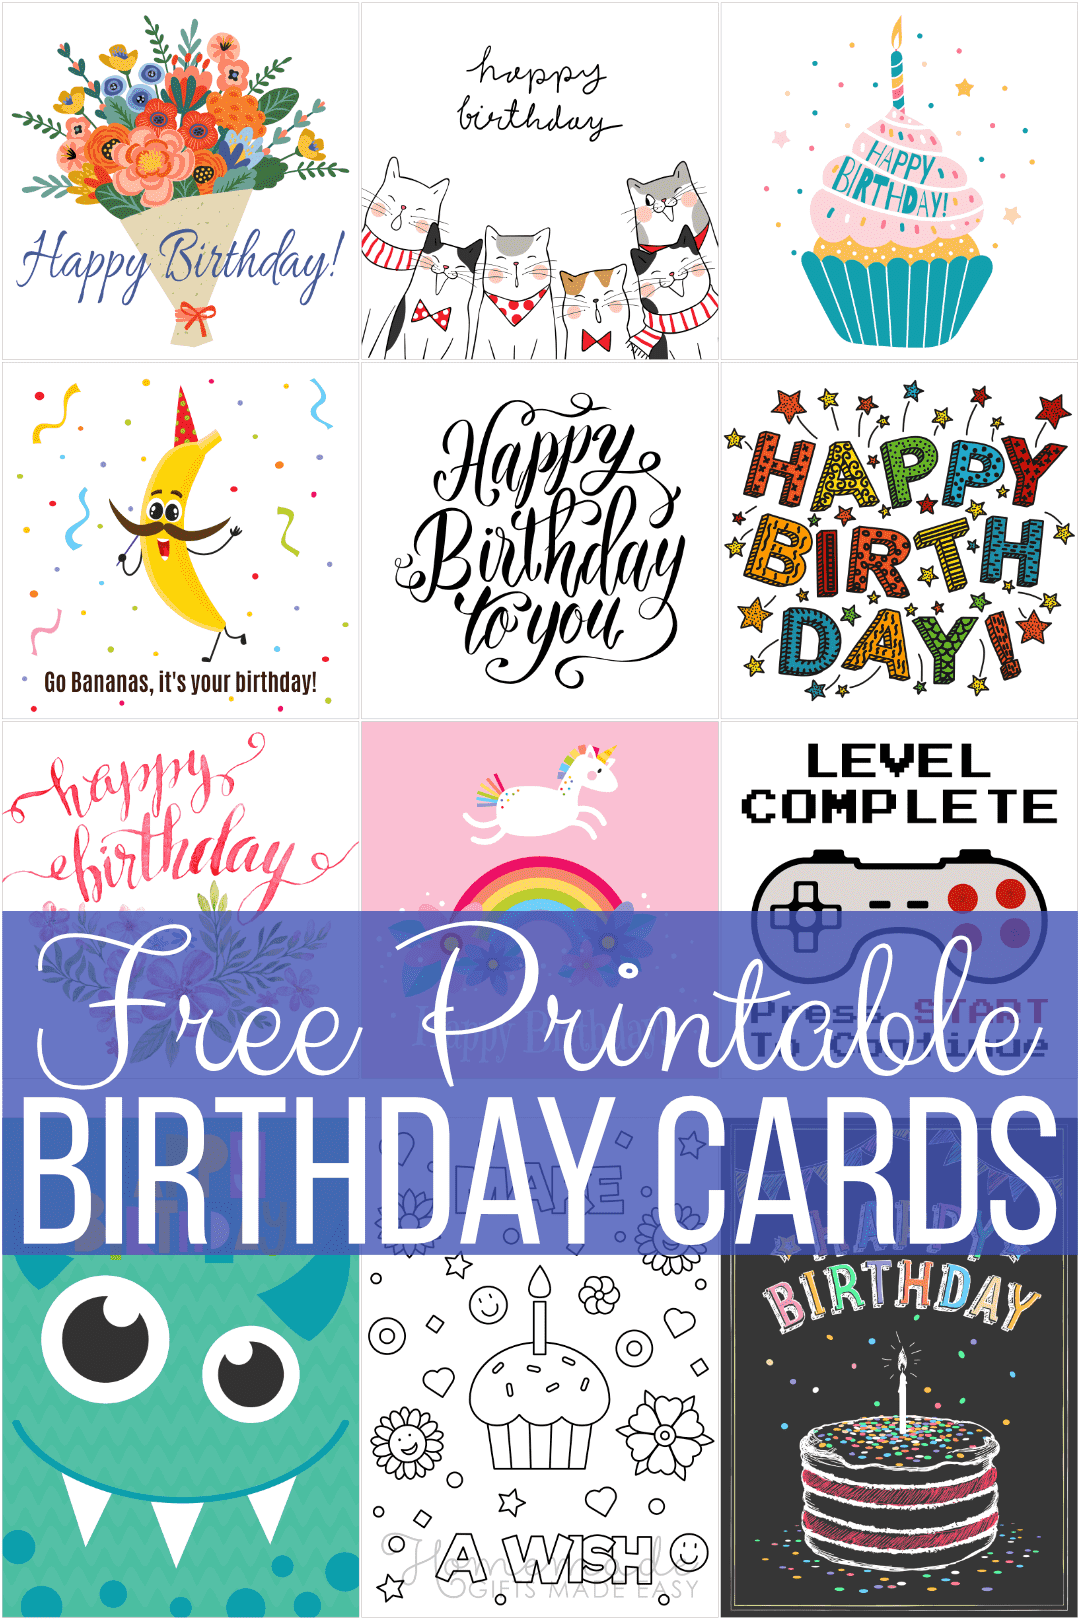 Best Site For Free Printable Birthday Cards